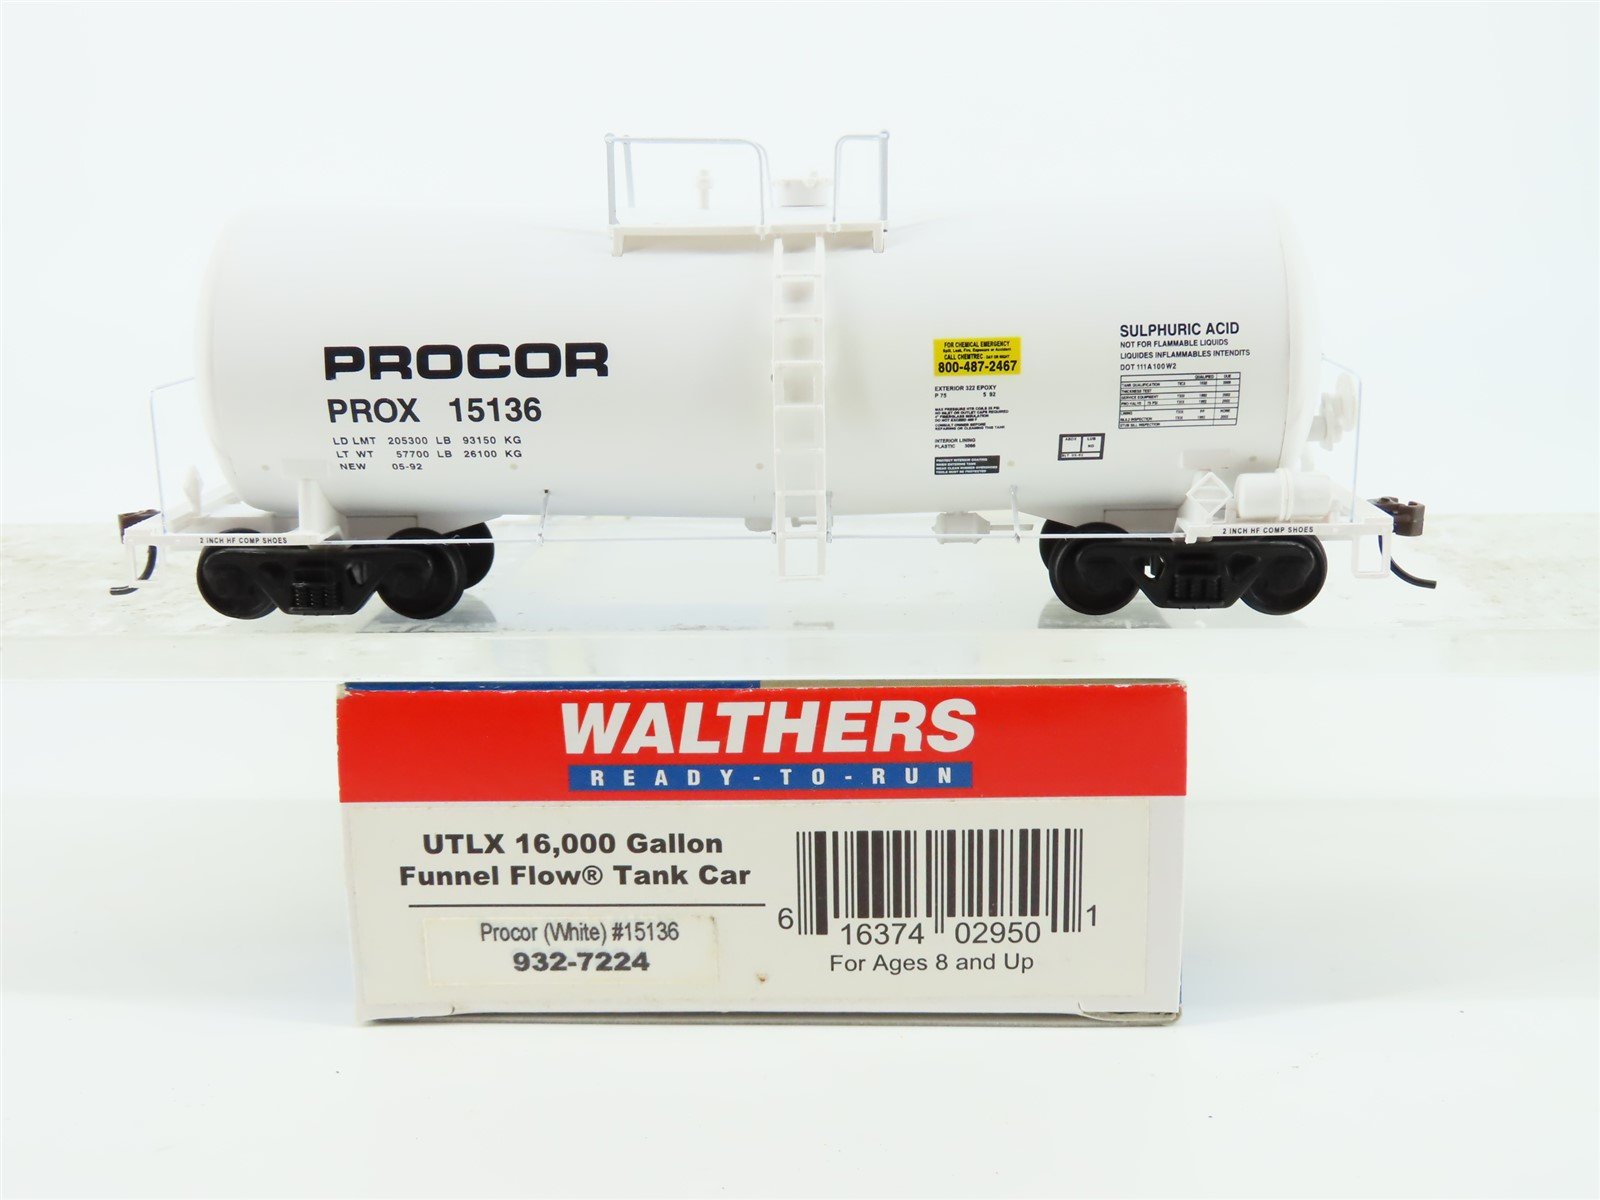 HO Scale Walthers 932-7224 PROX Procor 16000 Gallon Funnel Flow Tank Car #15136